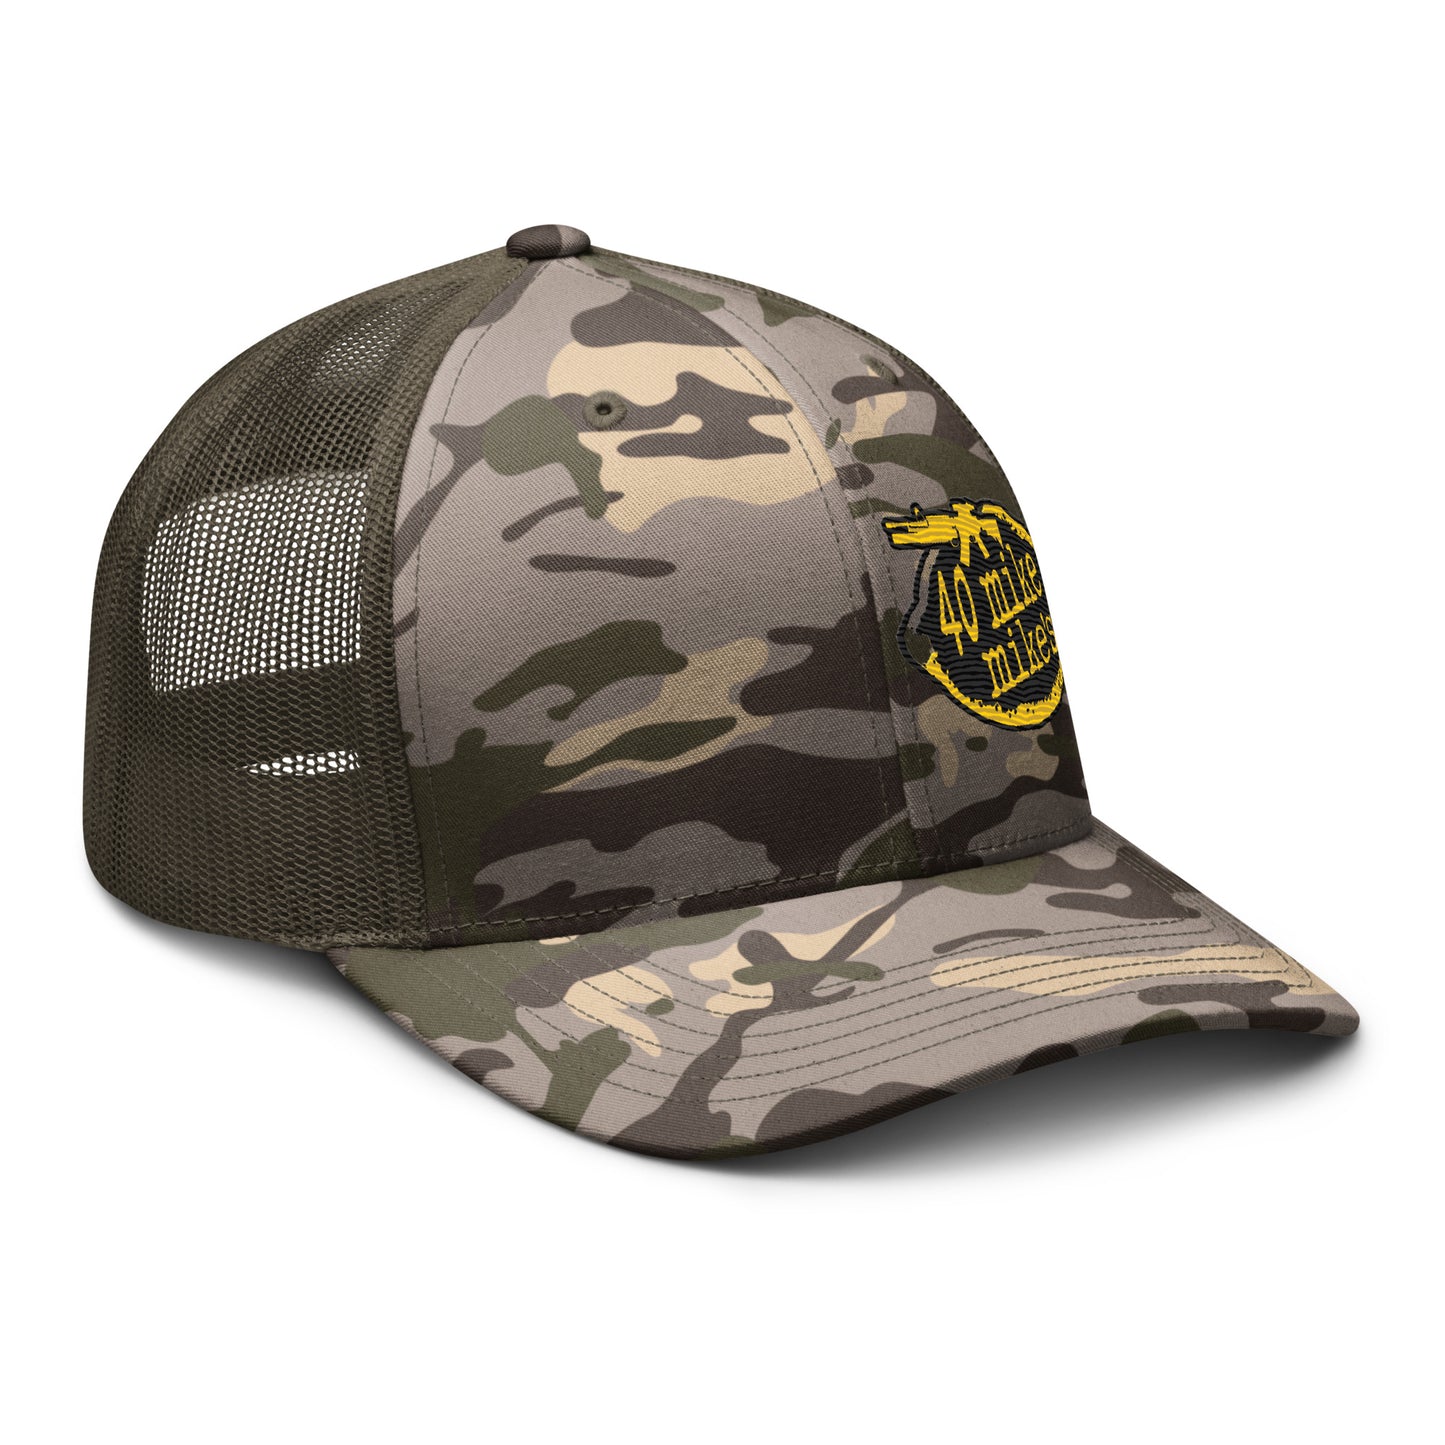 40 Mike Mikes Camouflage trucker hat